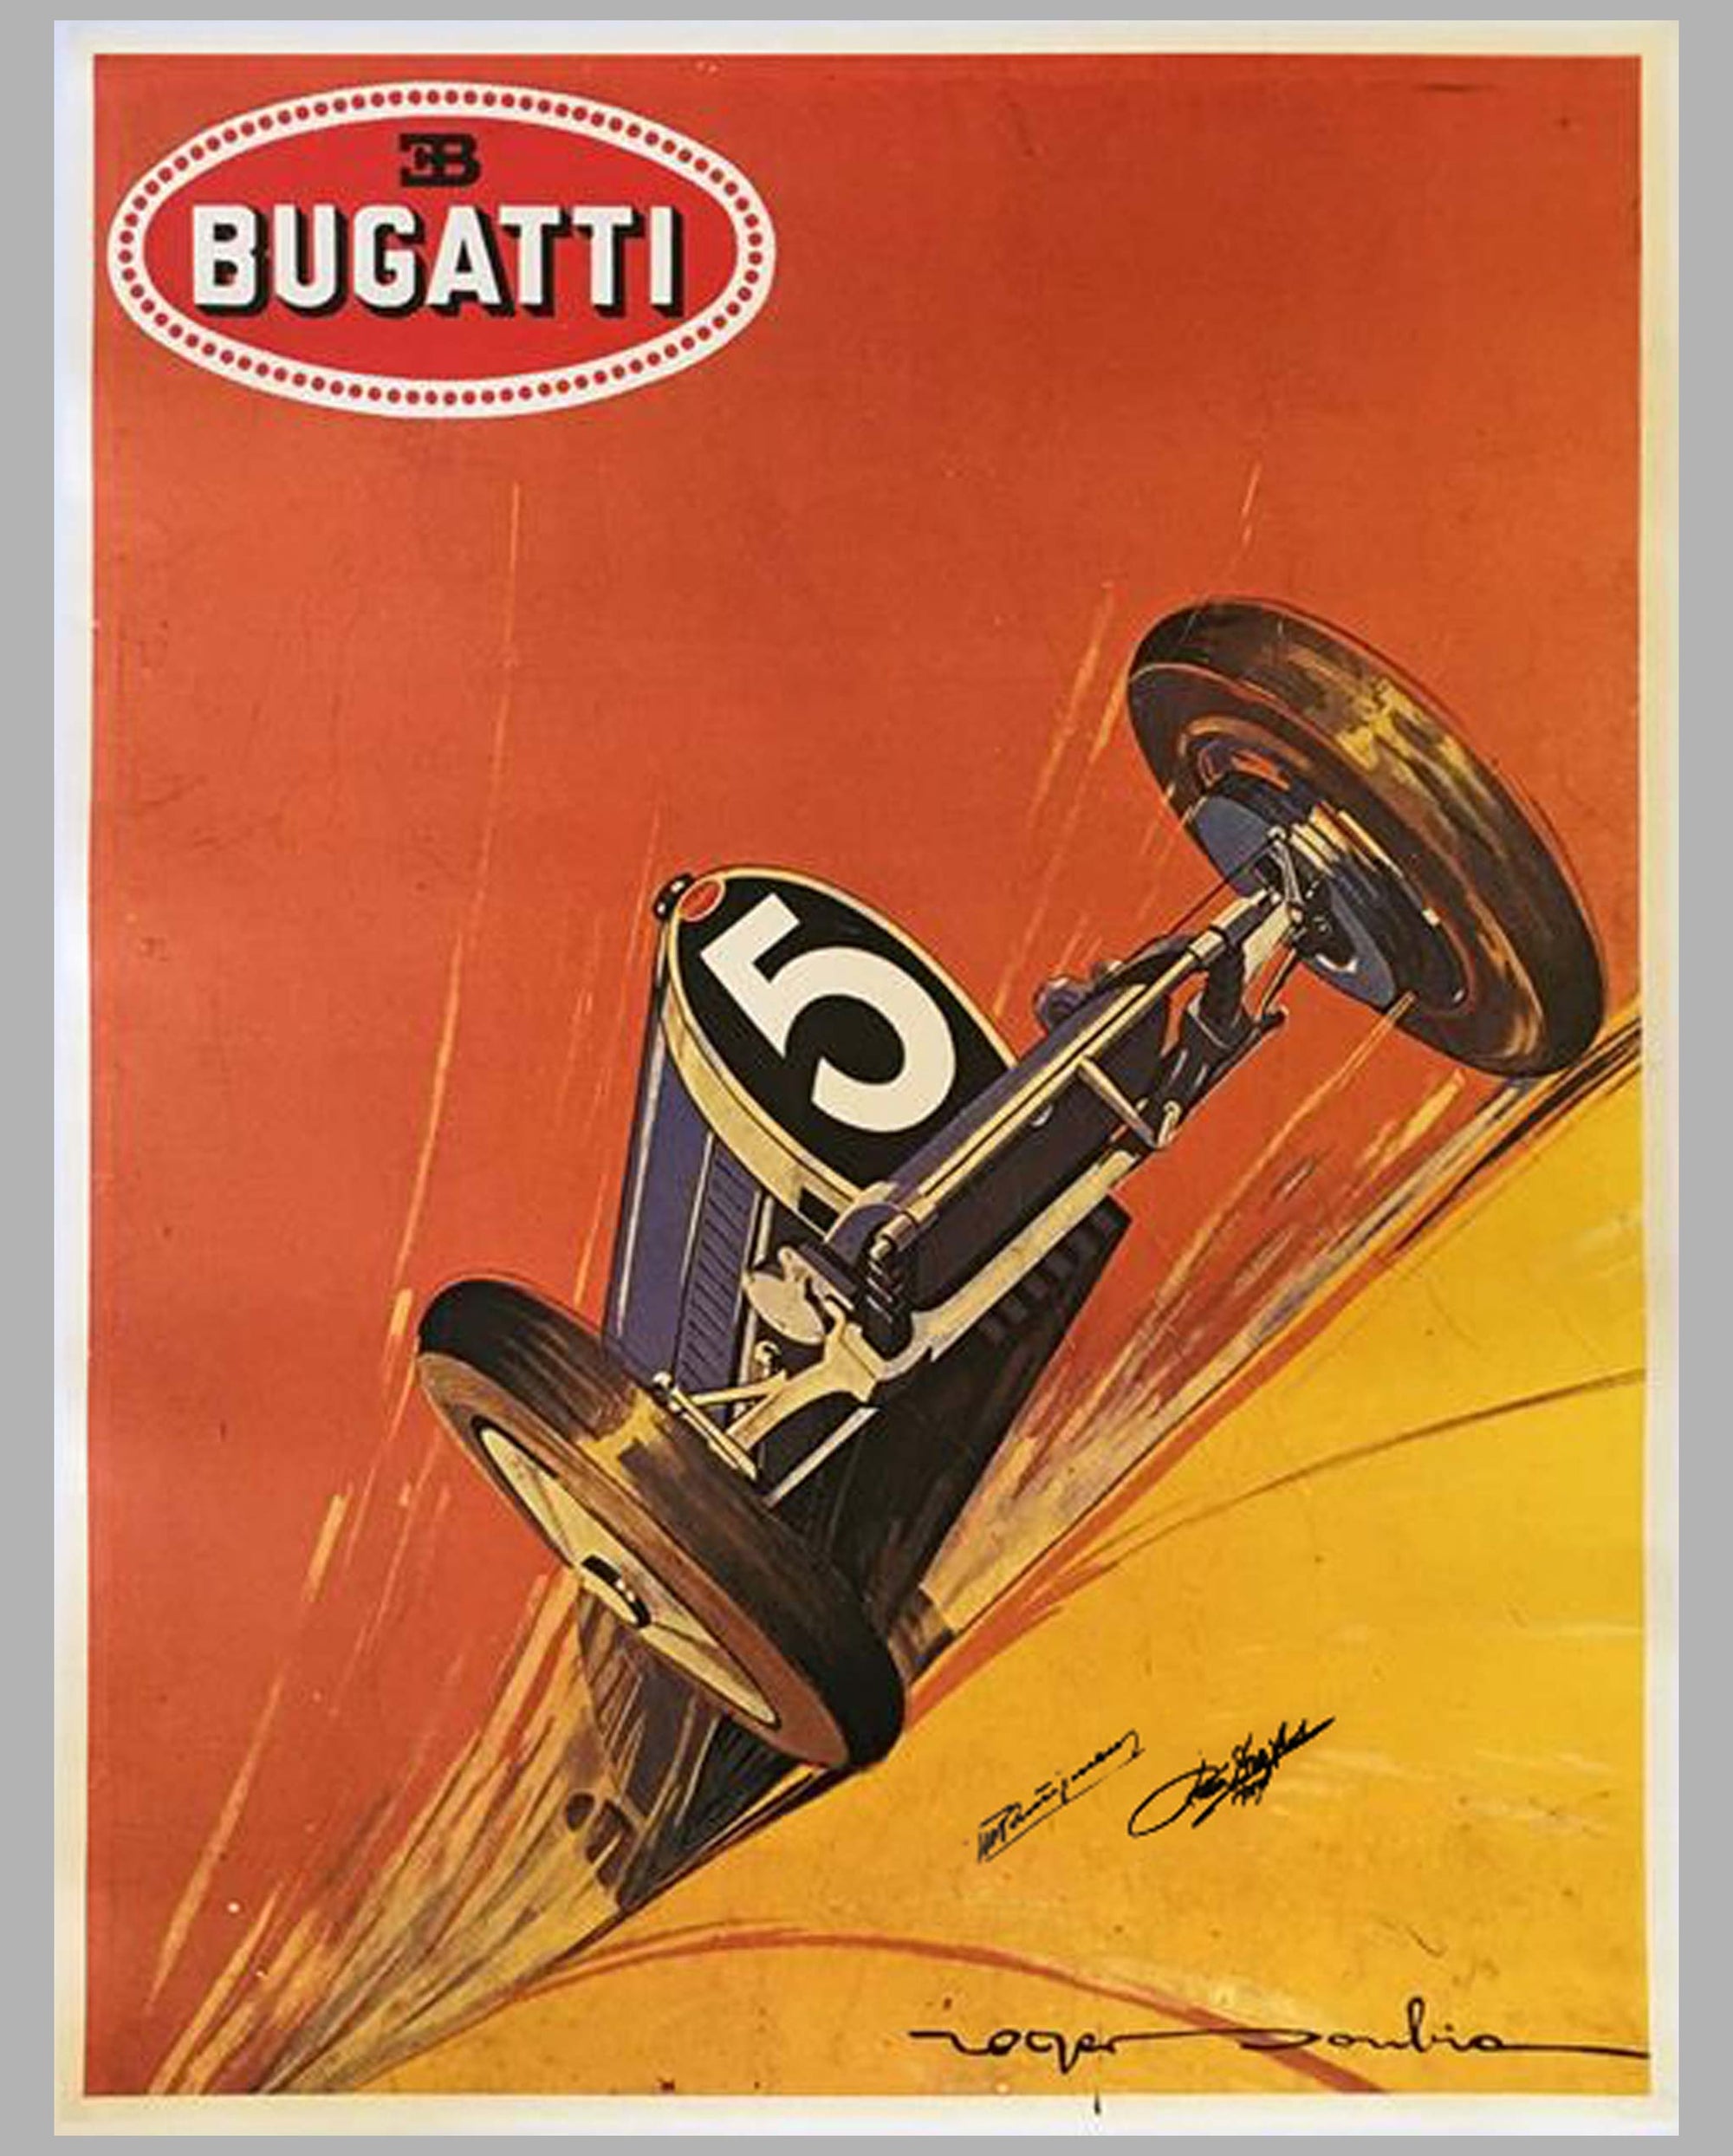 Bugatti advertising poster, mid 1920's by Roger Soubie, autographed by Dreyfus and Trintignant